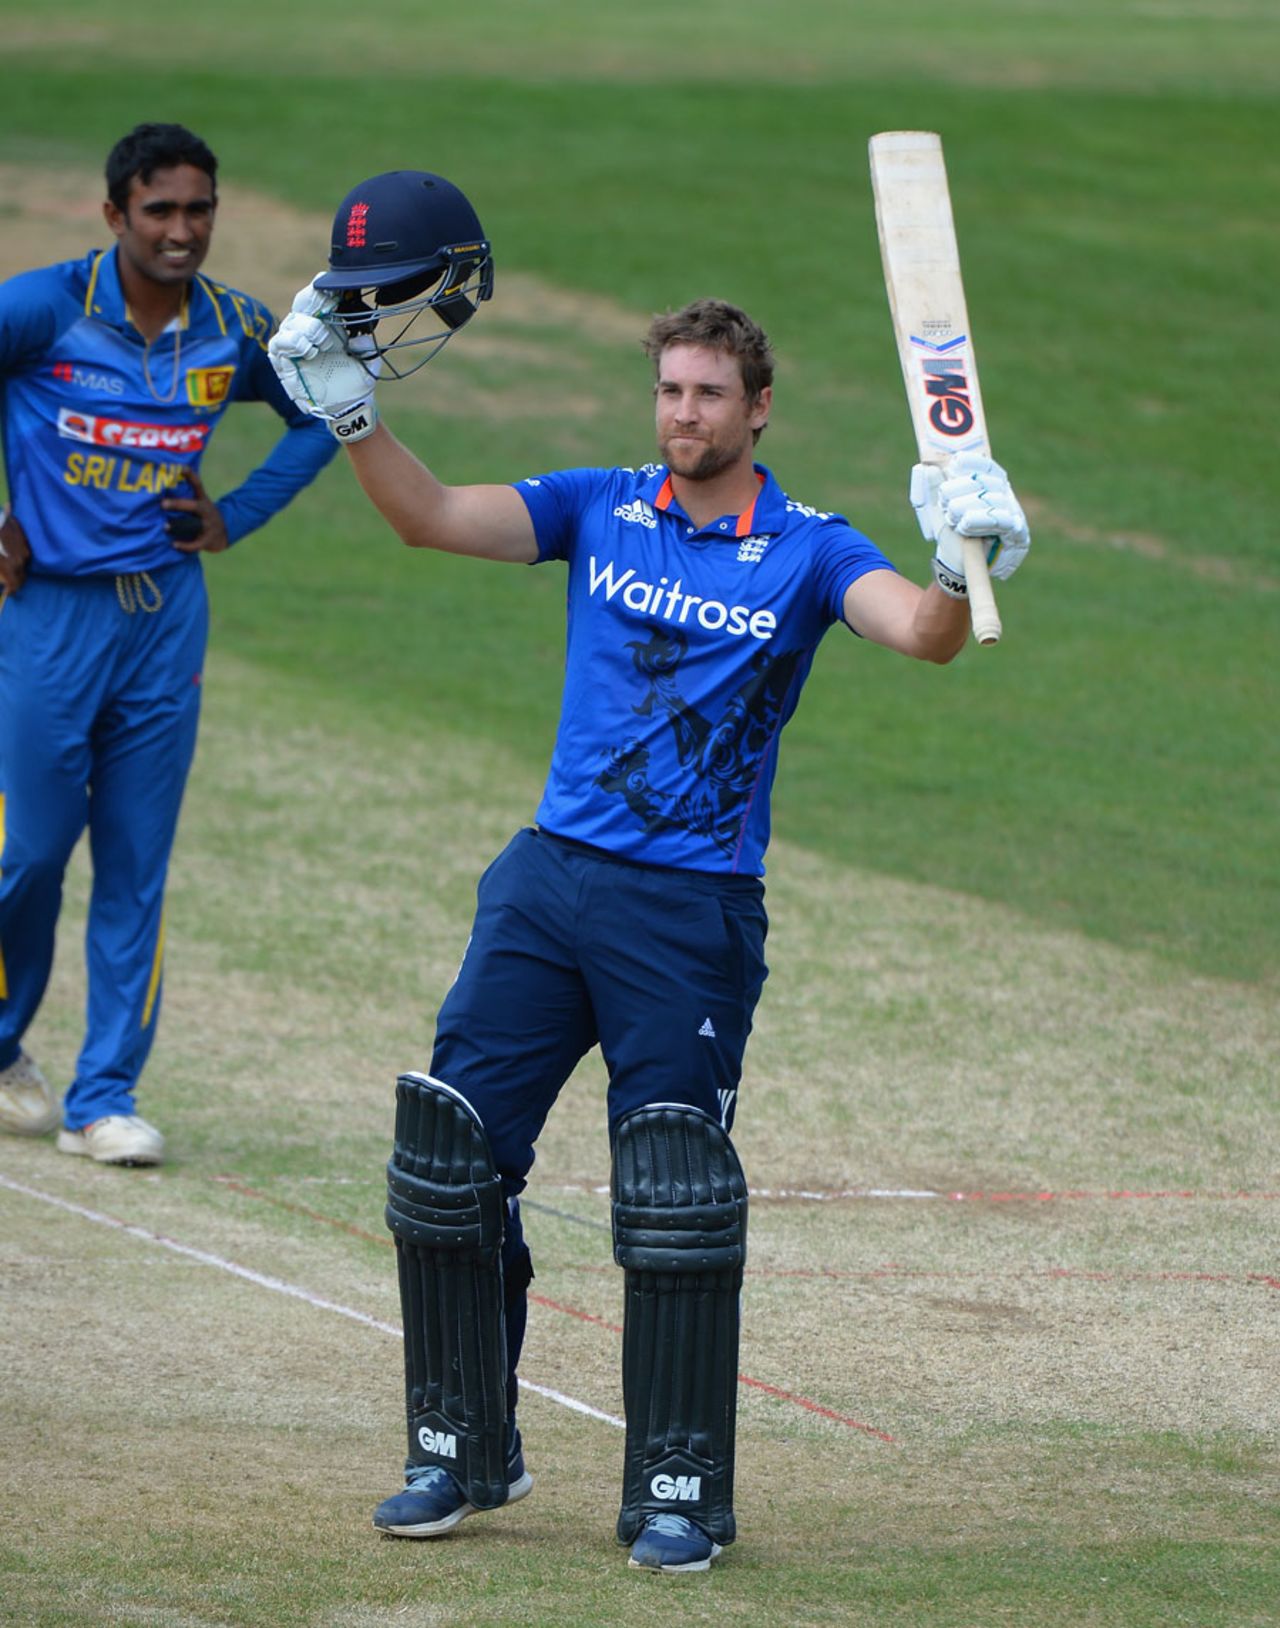 Dawid Malan reached his hundred from 92 balls, England Lions v Sri Lank A, Tri-series, Wantage Road, July 21, 2016